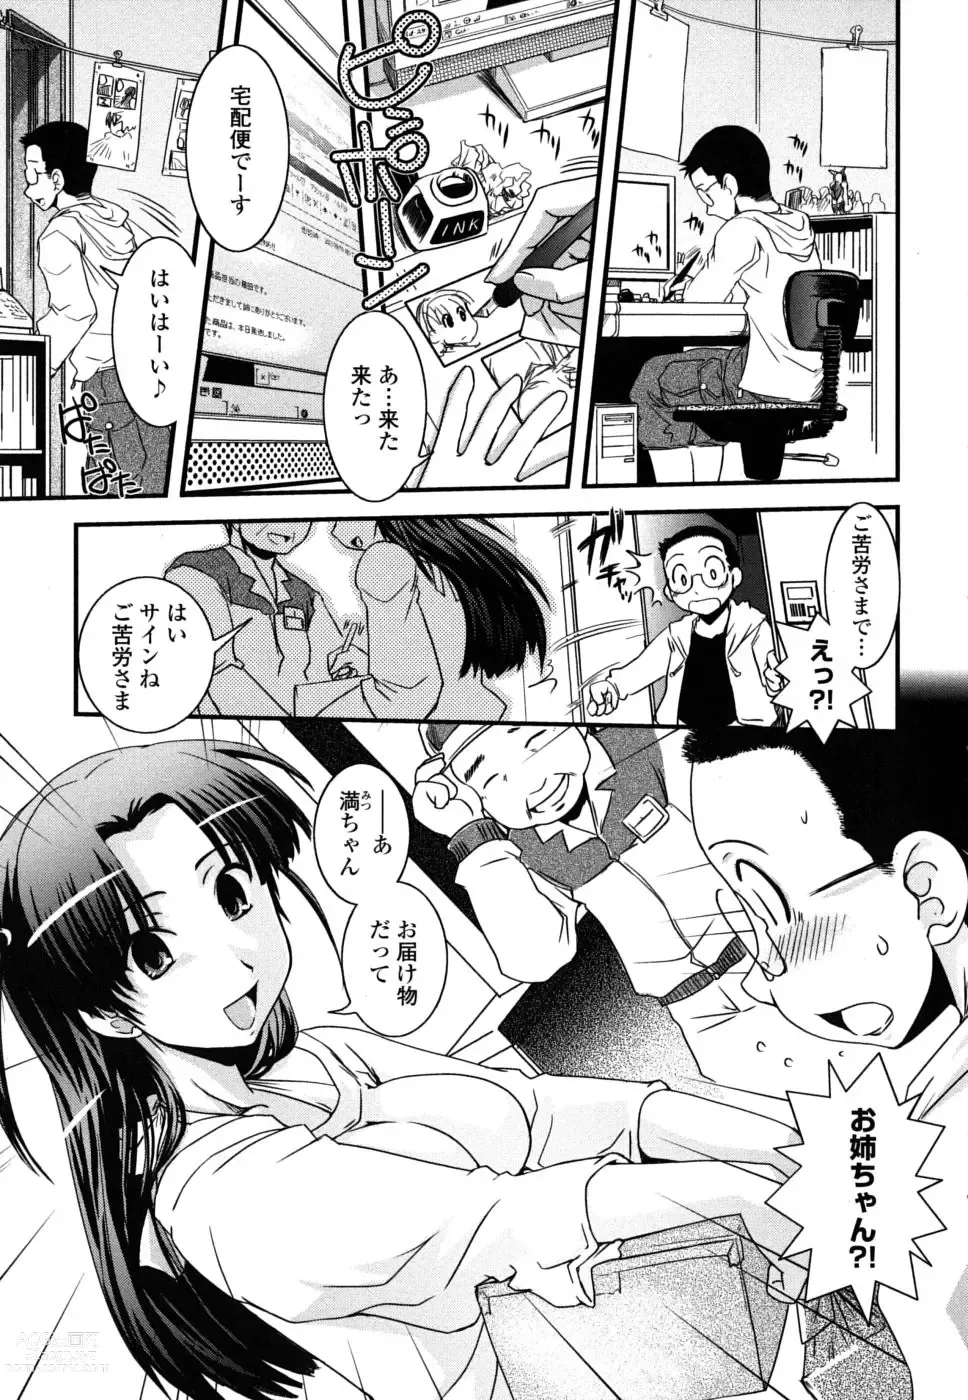 Page 9 of manga The elder sister, and disguising as a woman and comic artist